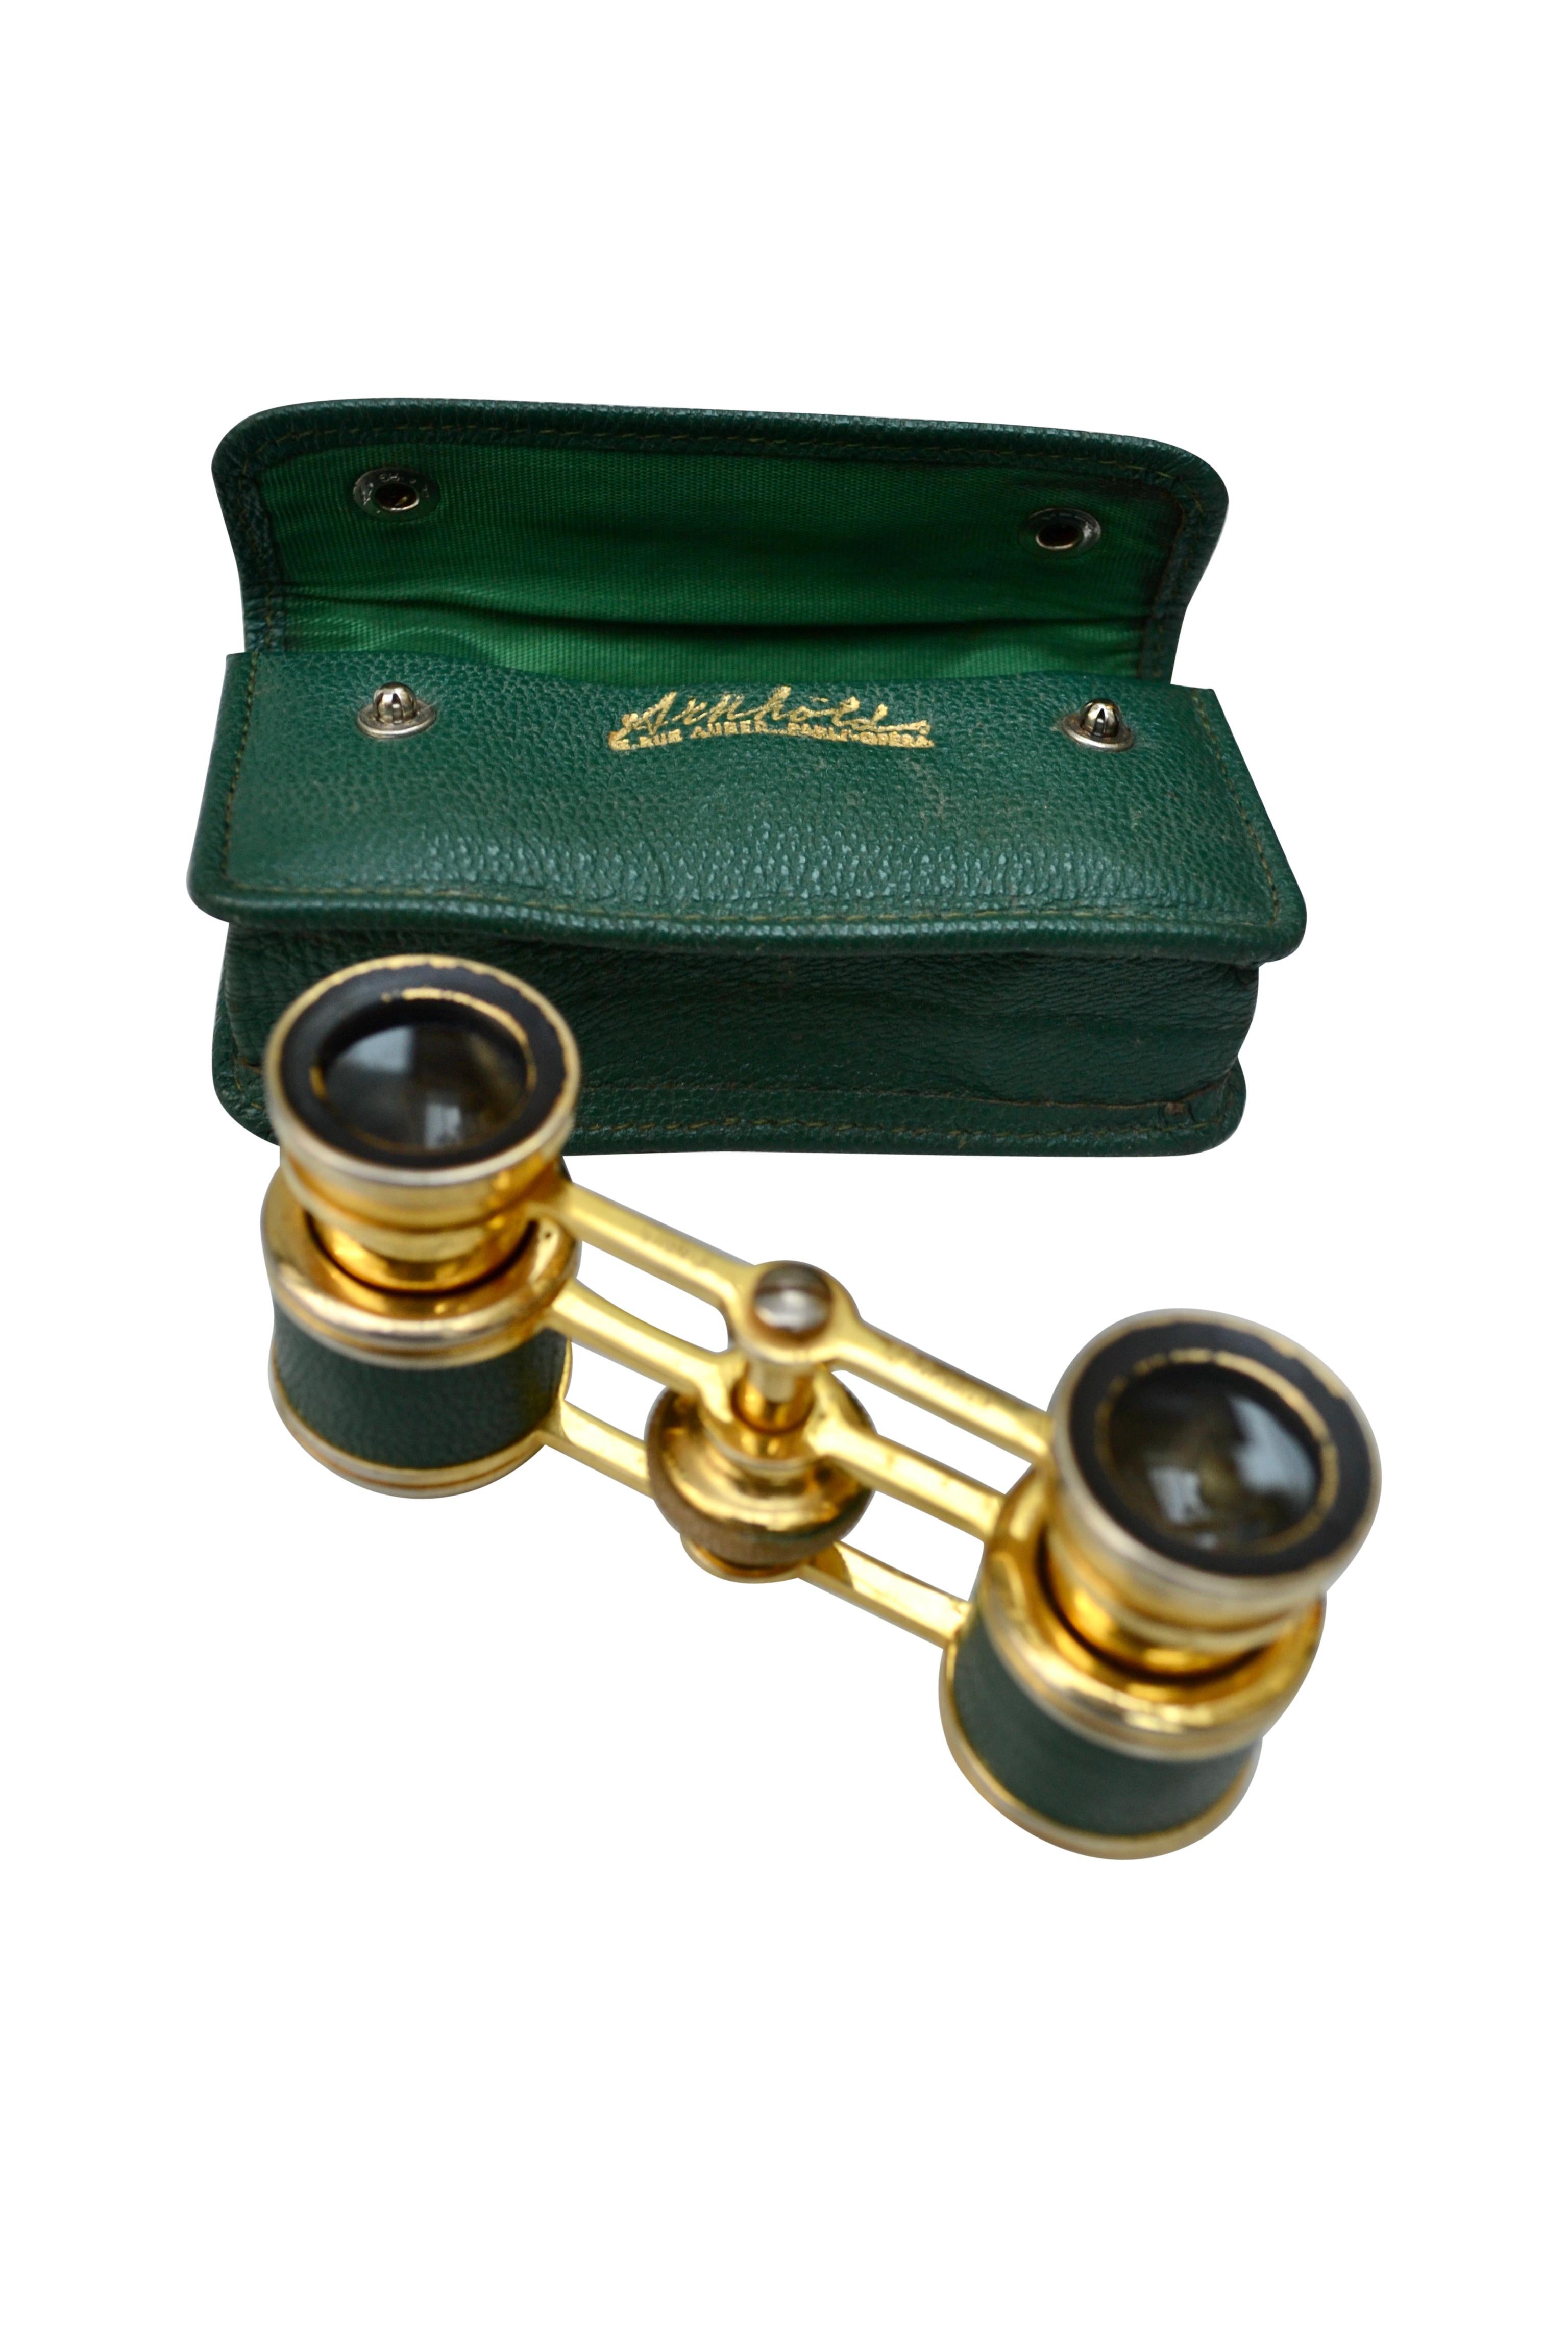 Art Deco  Brass and Green Leather Opera Glasses From Arnhold Paris In Original Case 